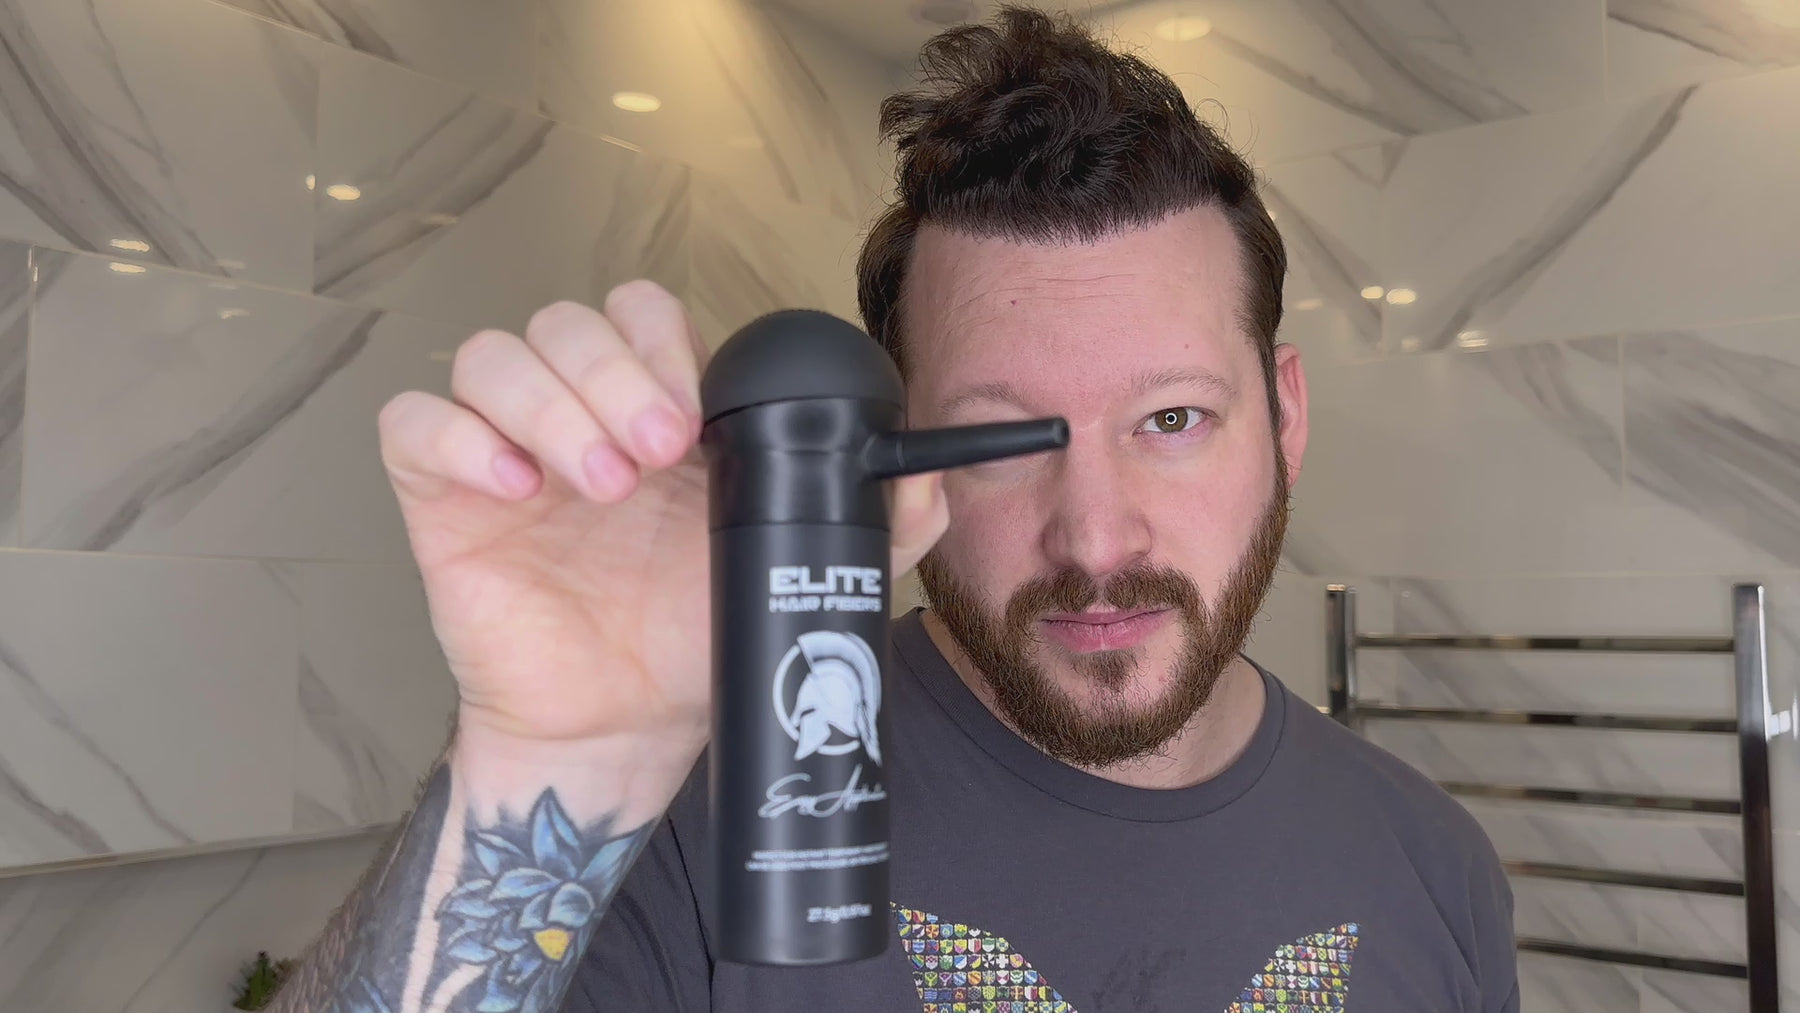 Applying Elite Hair Fibers to hairline with ease using spray applicator